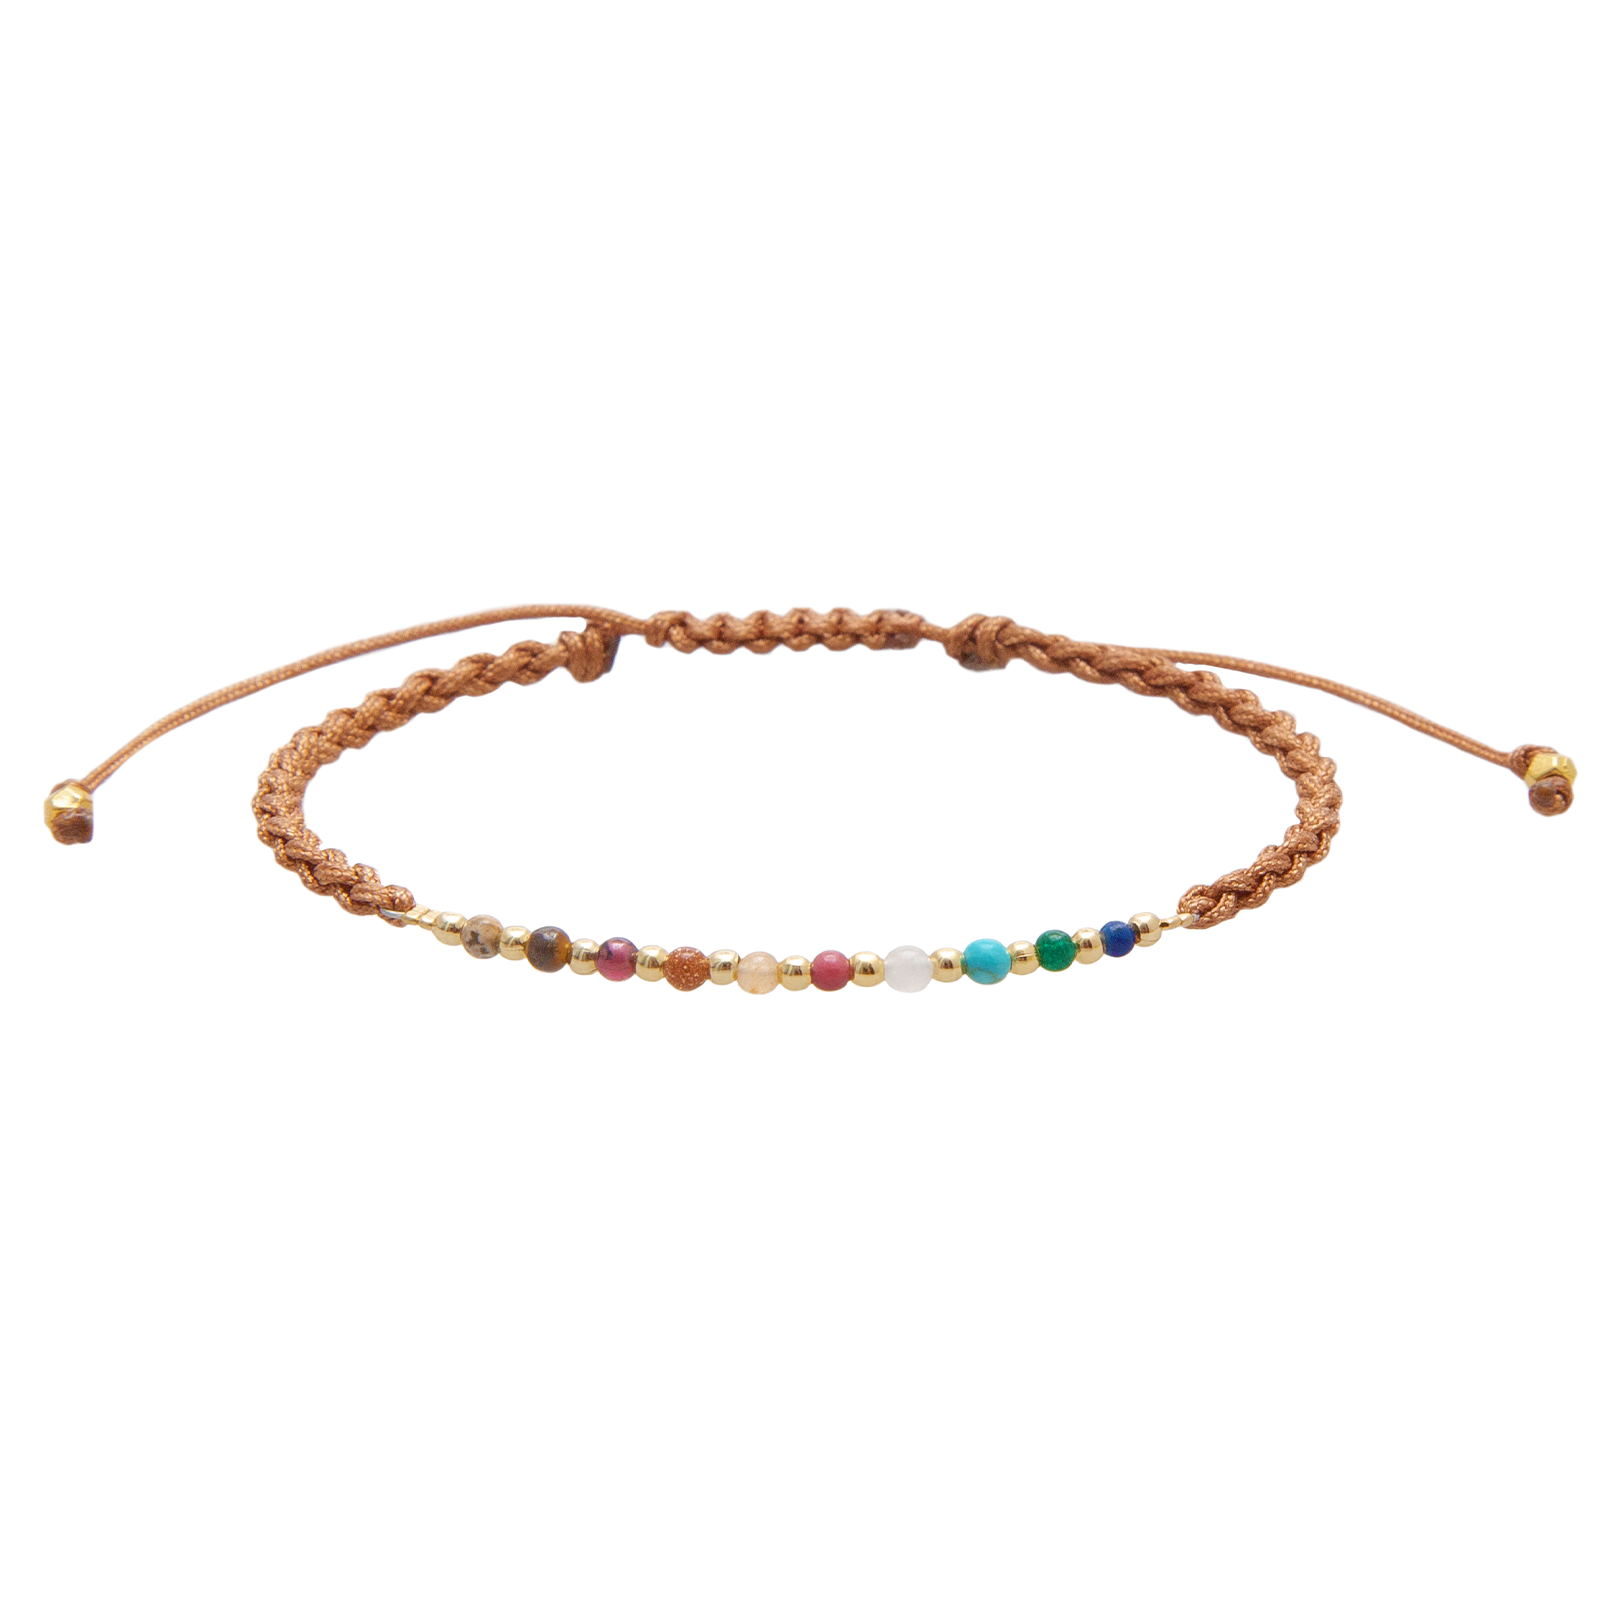 2mm multicolor stone and gold bead healing bracelet with a brown cotton braided cord.